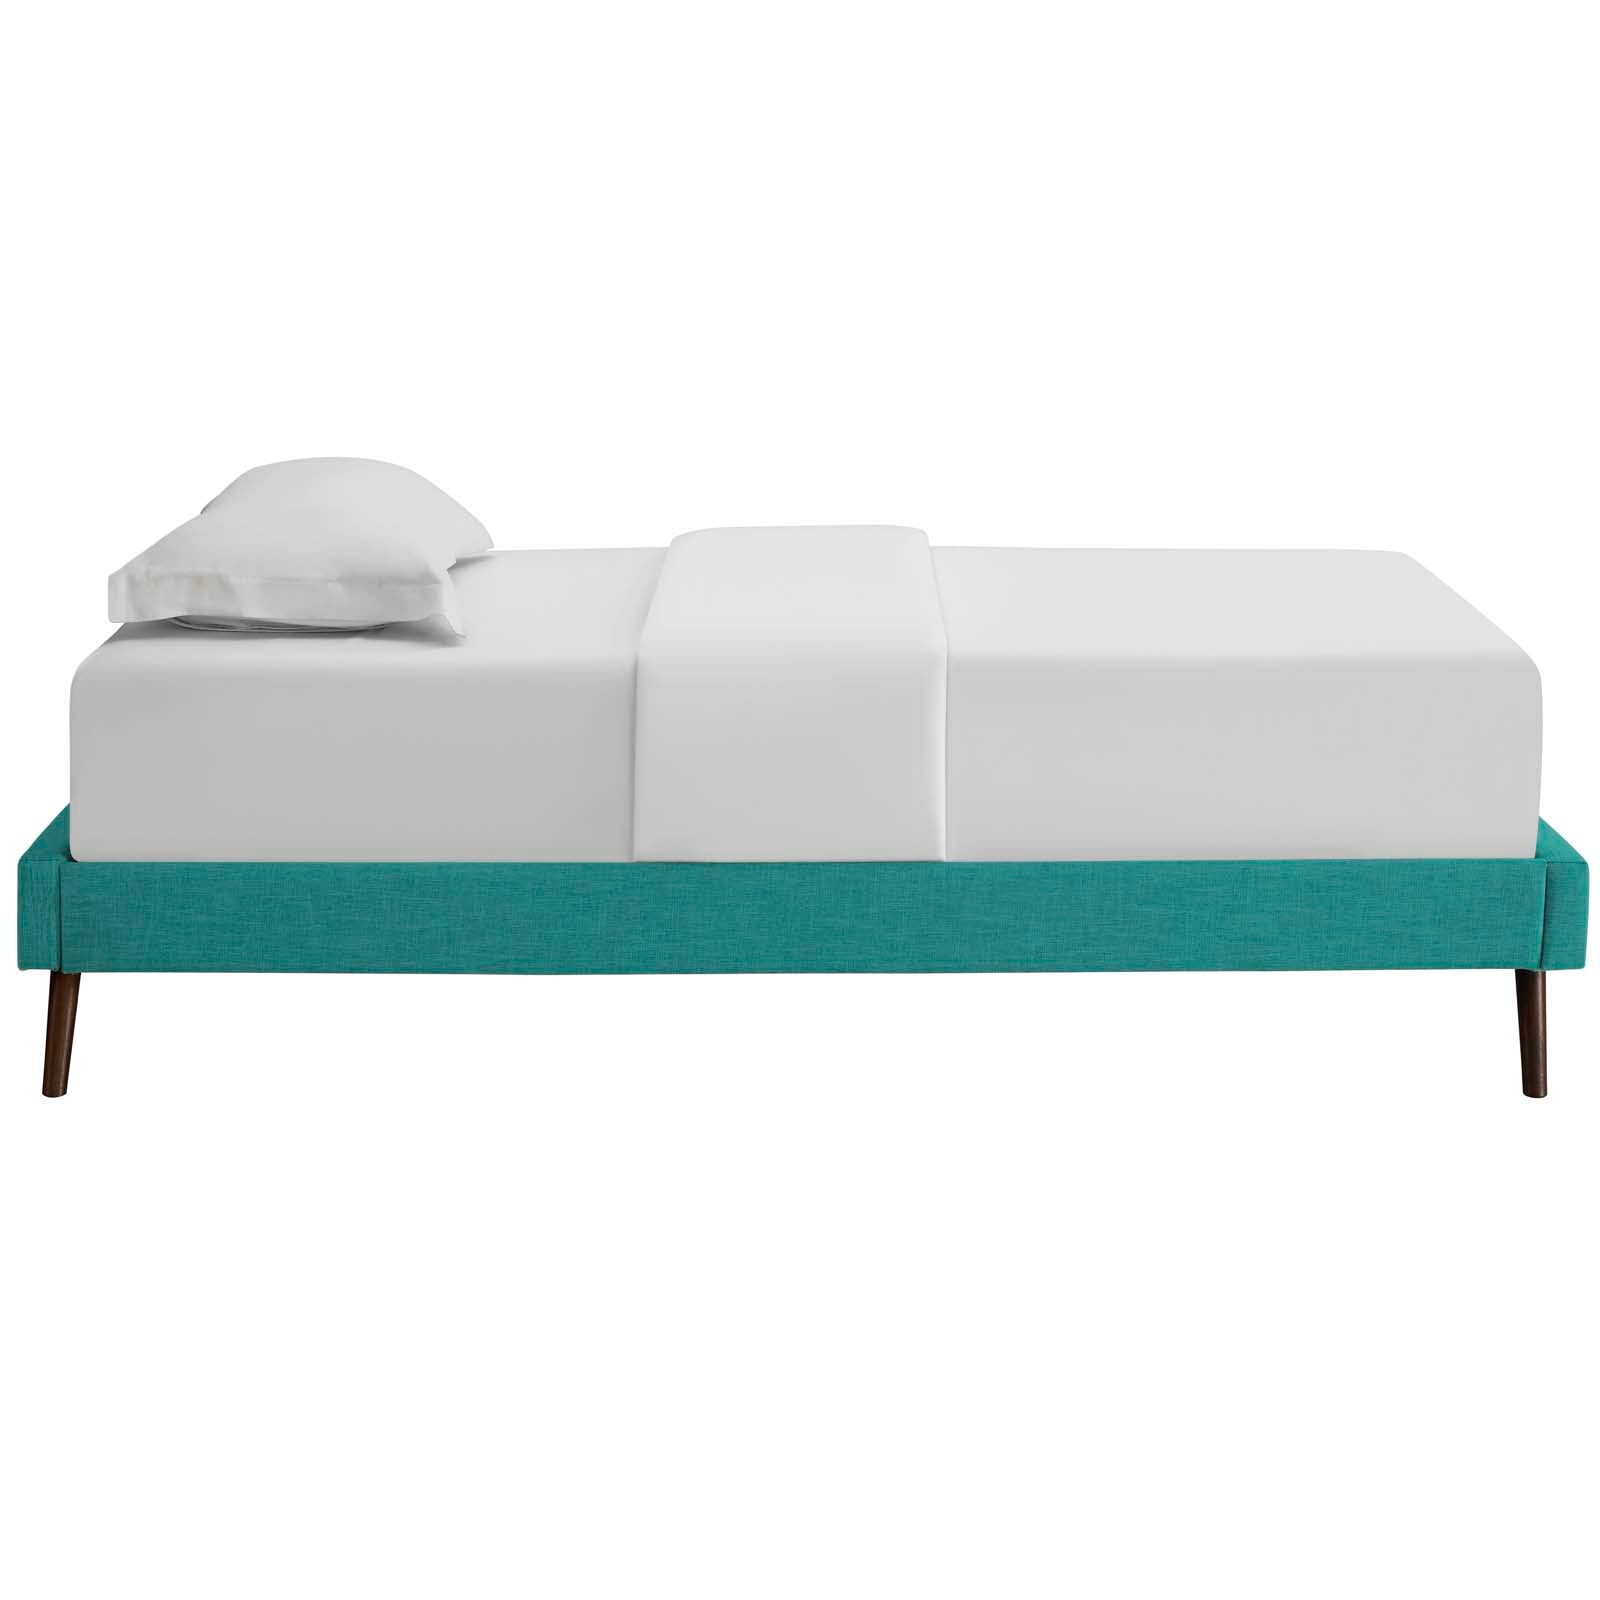 Modway Beds - Loryn Twin Fabric Bed Frame with Round Splayed Legs Teal